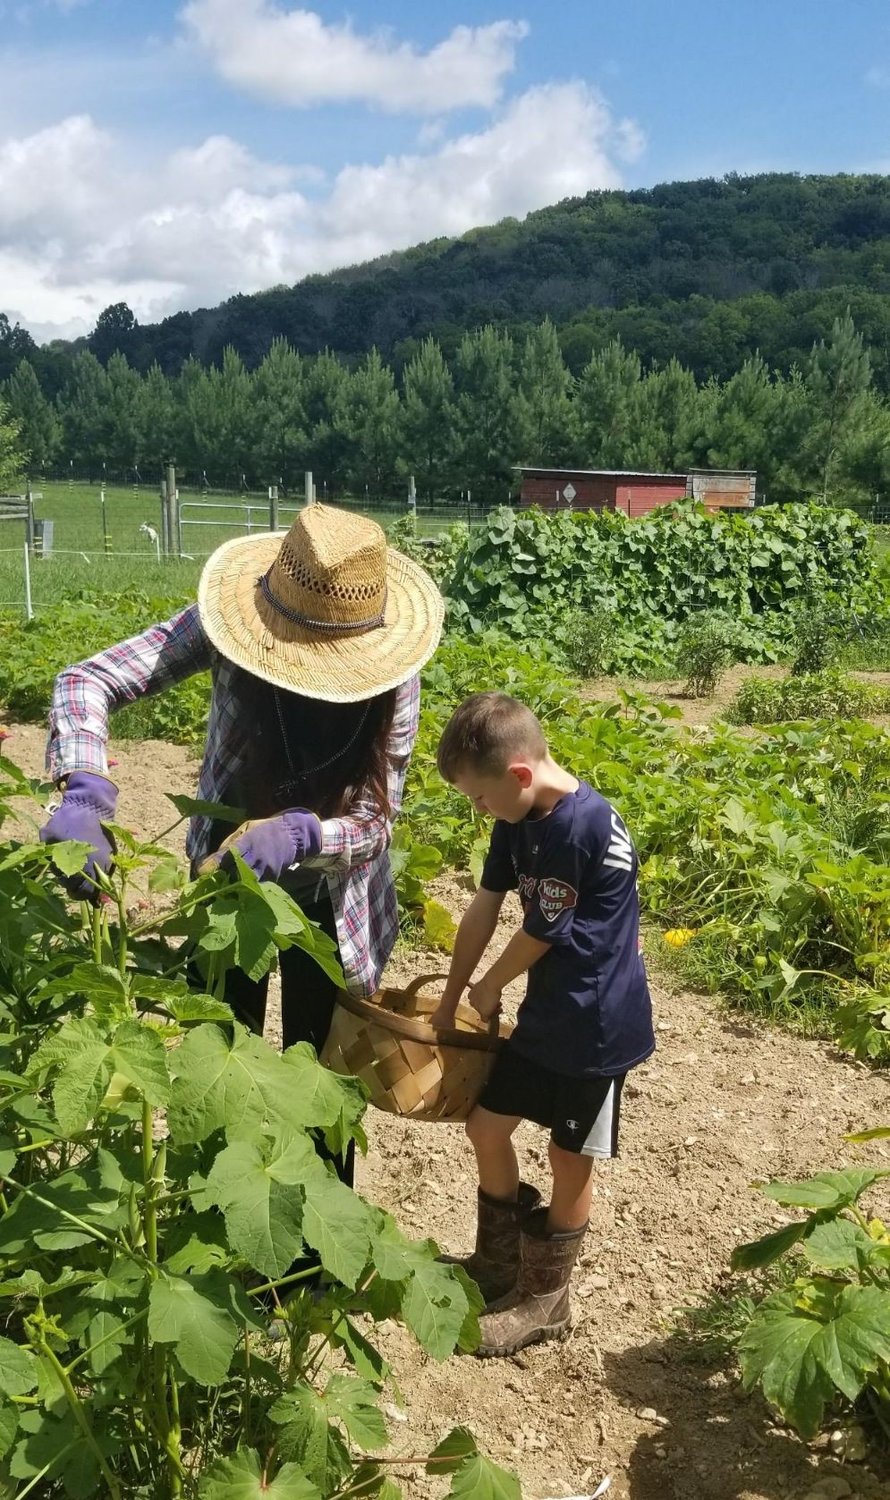 Jennifer Maddox and son, Stone, have their heads bent as they work to harvest their garden. Stone enjoys helping with the canning process.